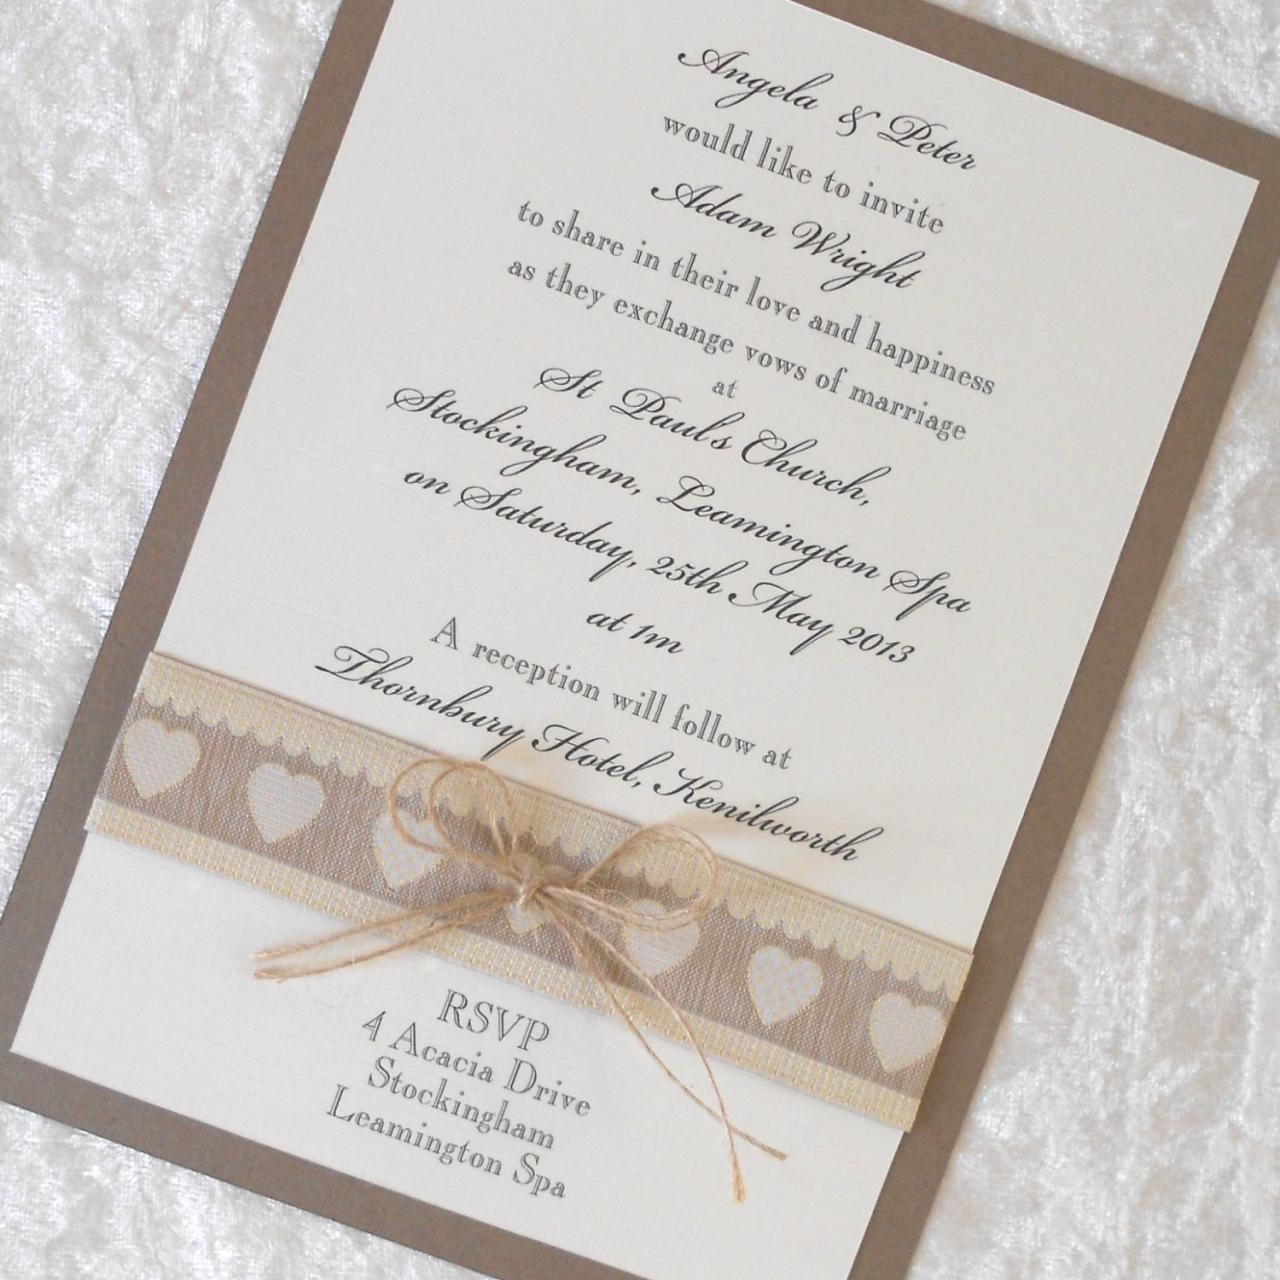 Rustic Country Chic Wedding Invitations X 5 Personalised Primitive Hearts (ref 21)